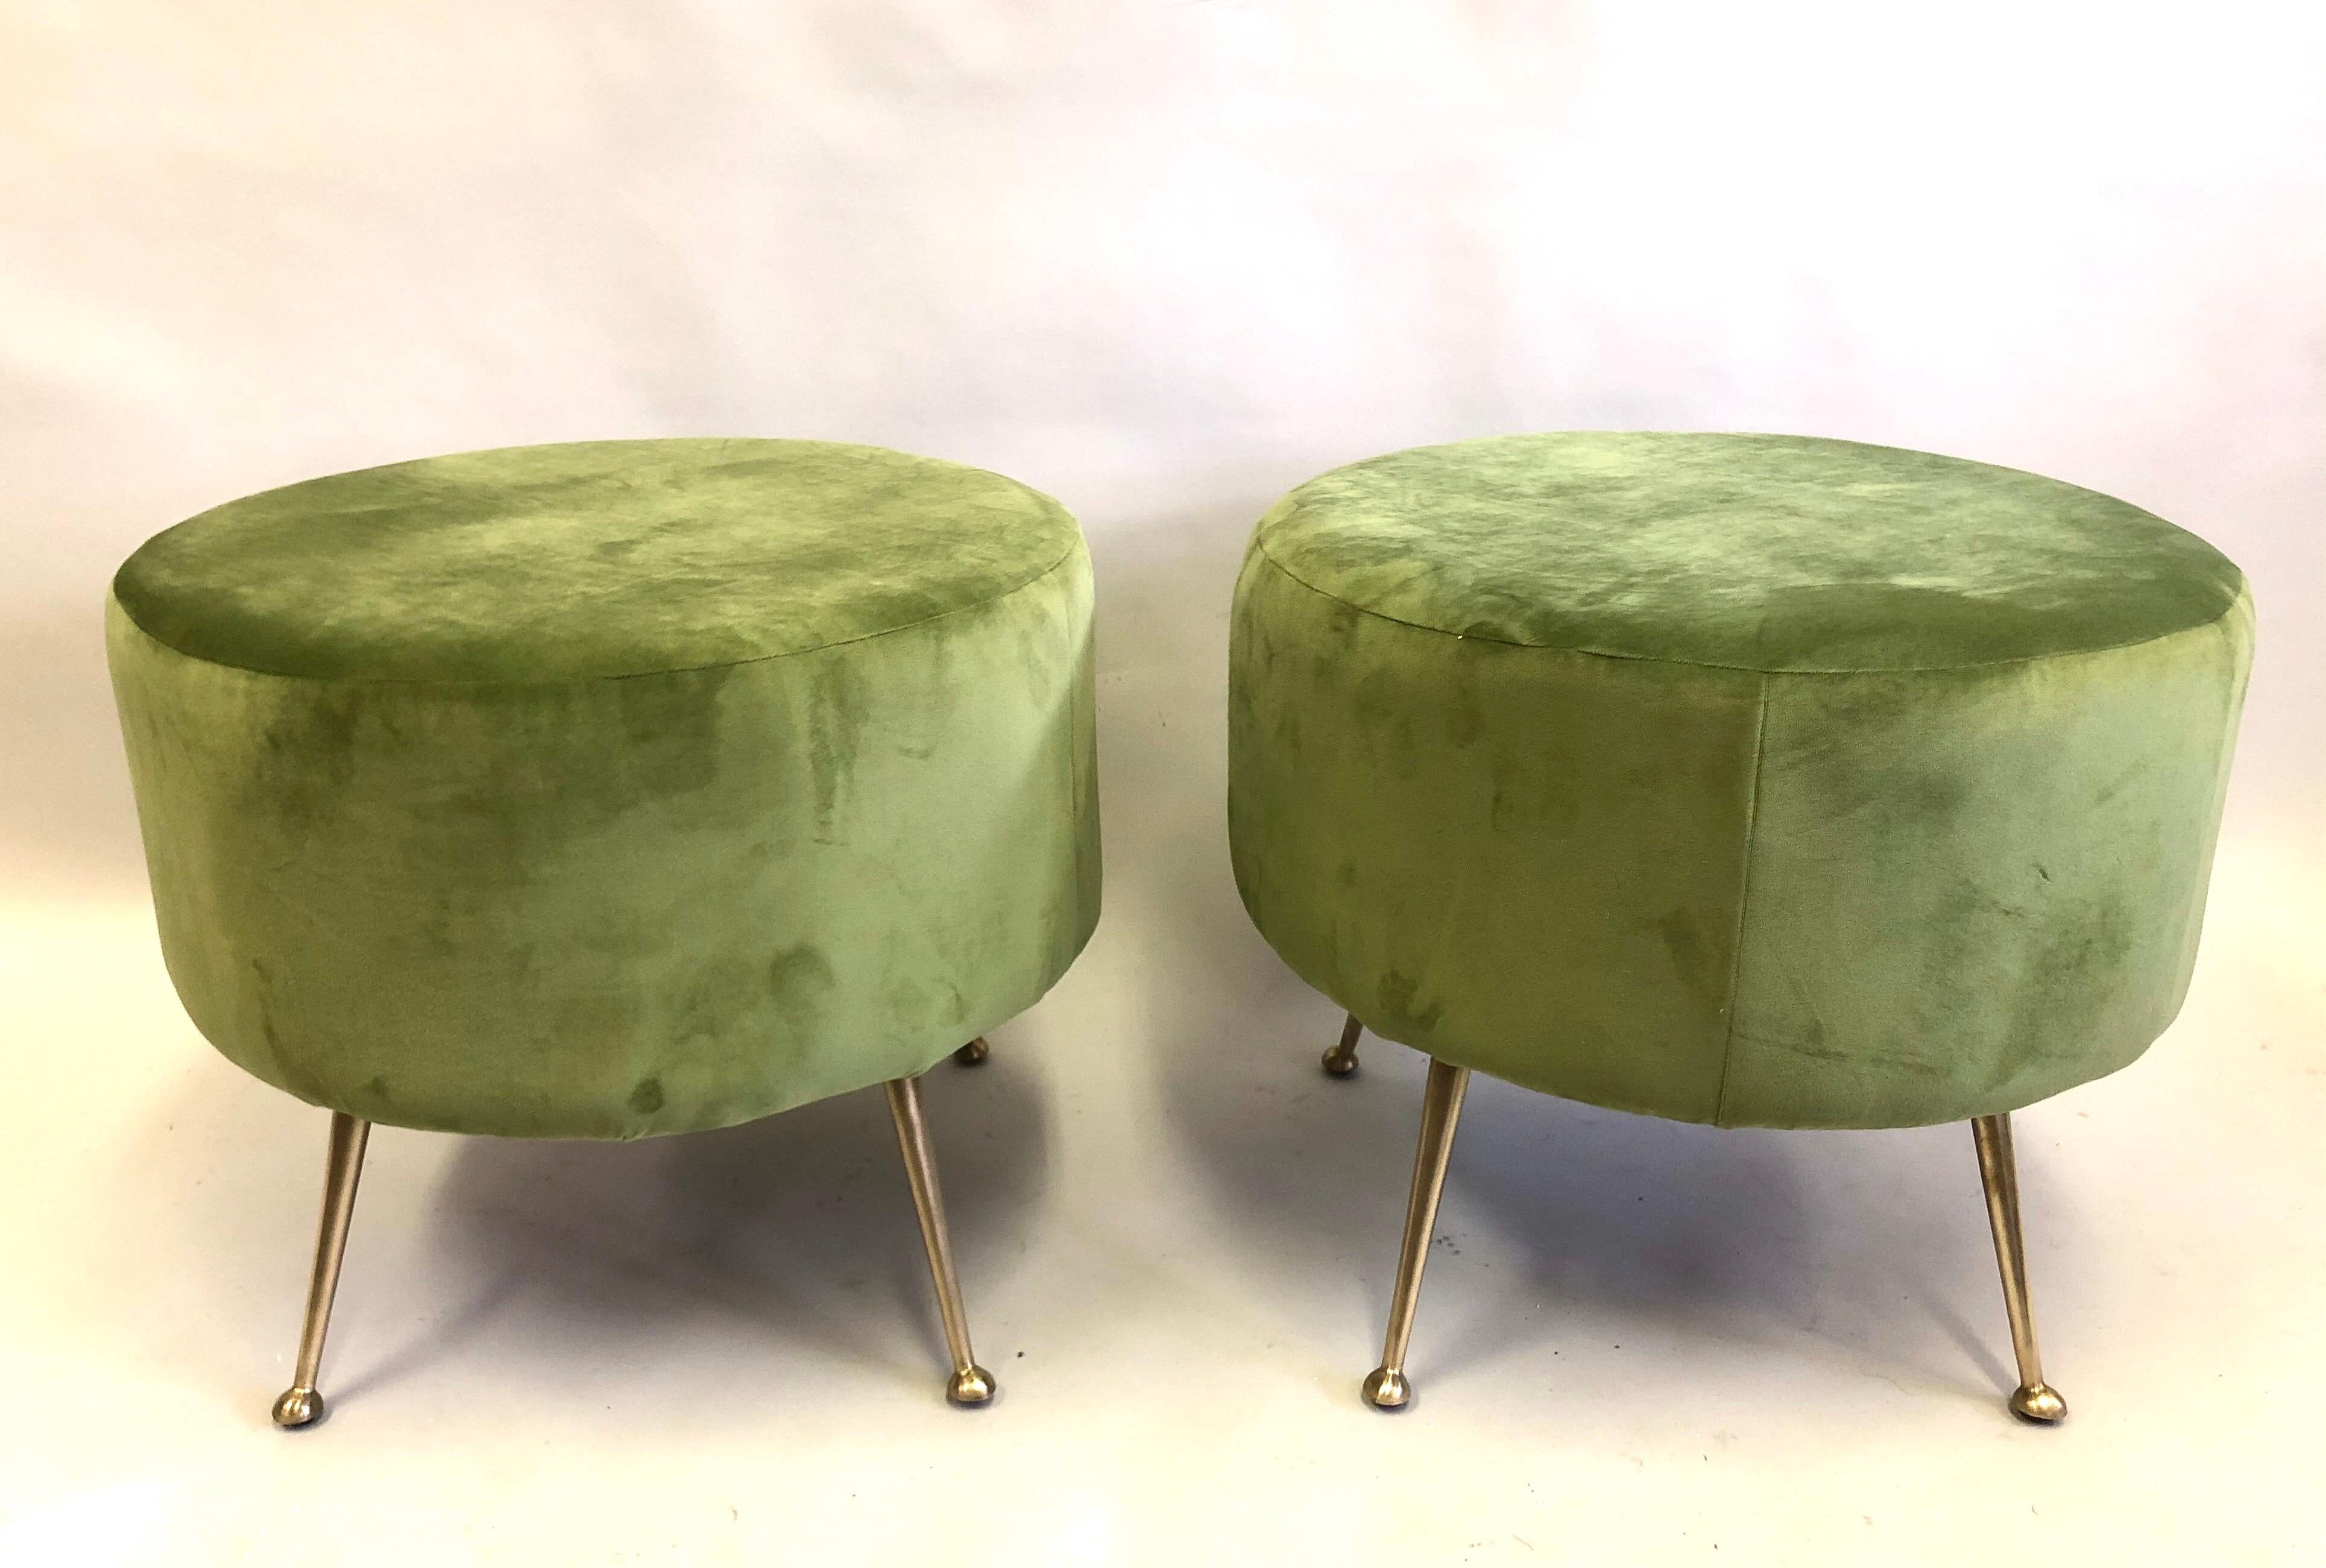 Elegant Pair of Italian Mid-Century Modern Organic form /  round stools or benches attributed to Marco Zanuso circa 1960.

The pieces are large and the organic round form is beautiful, inviting and practical. The legs are solid brass and feature